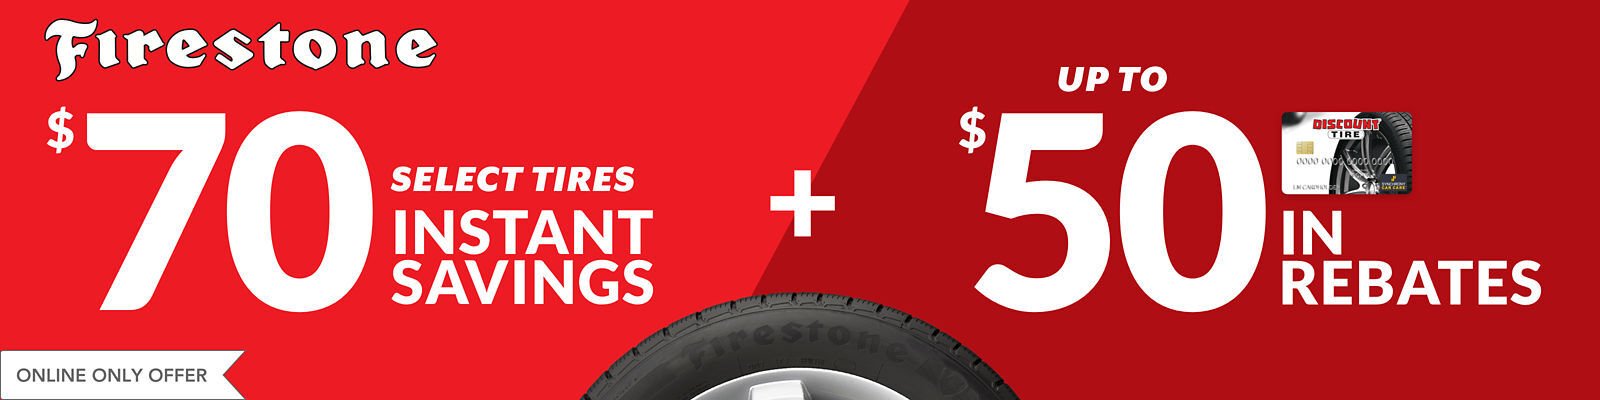 Firestone tire discount for may 2021 with Discount Tire Direct